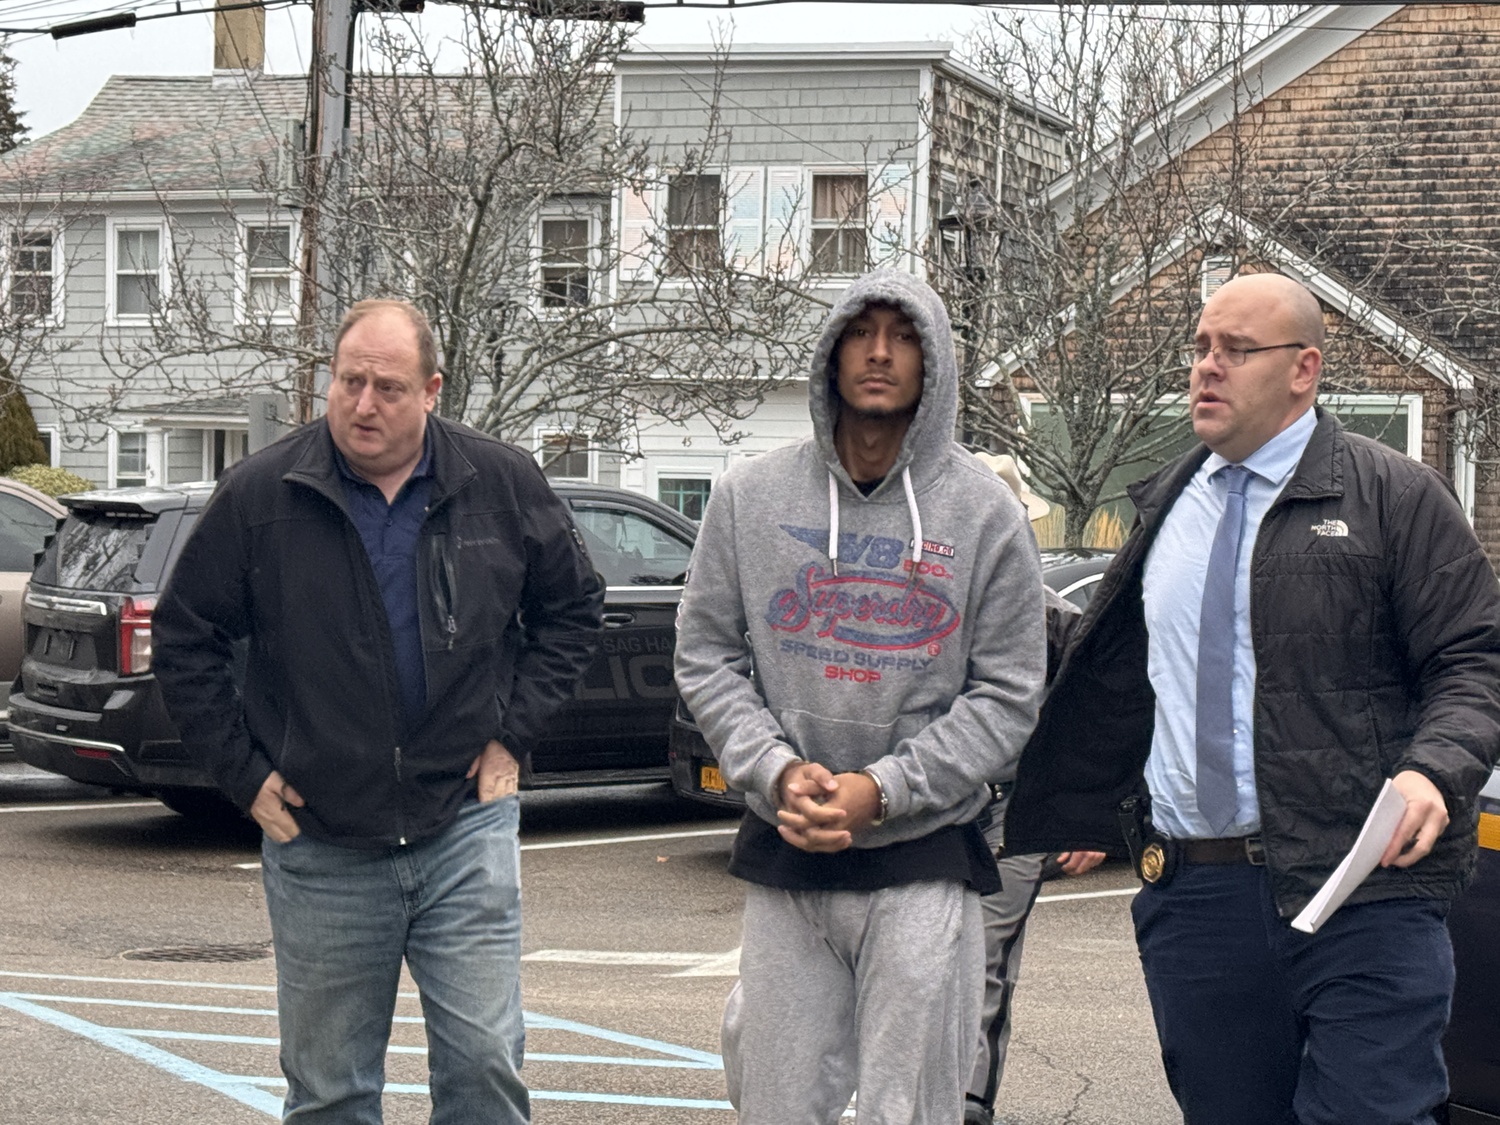 Peter C. Aviles was apprehended this week in New York City in relation to a 2022 burglary in Sag Harbor that netted more than $1 million in cash, jewelry and fine wines. He was brought into Sag Harbor Village Justice Court on Wednesday by New York State Police.